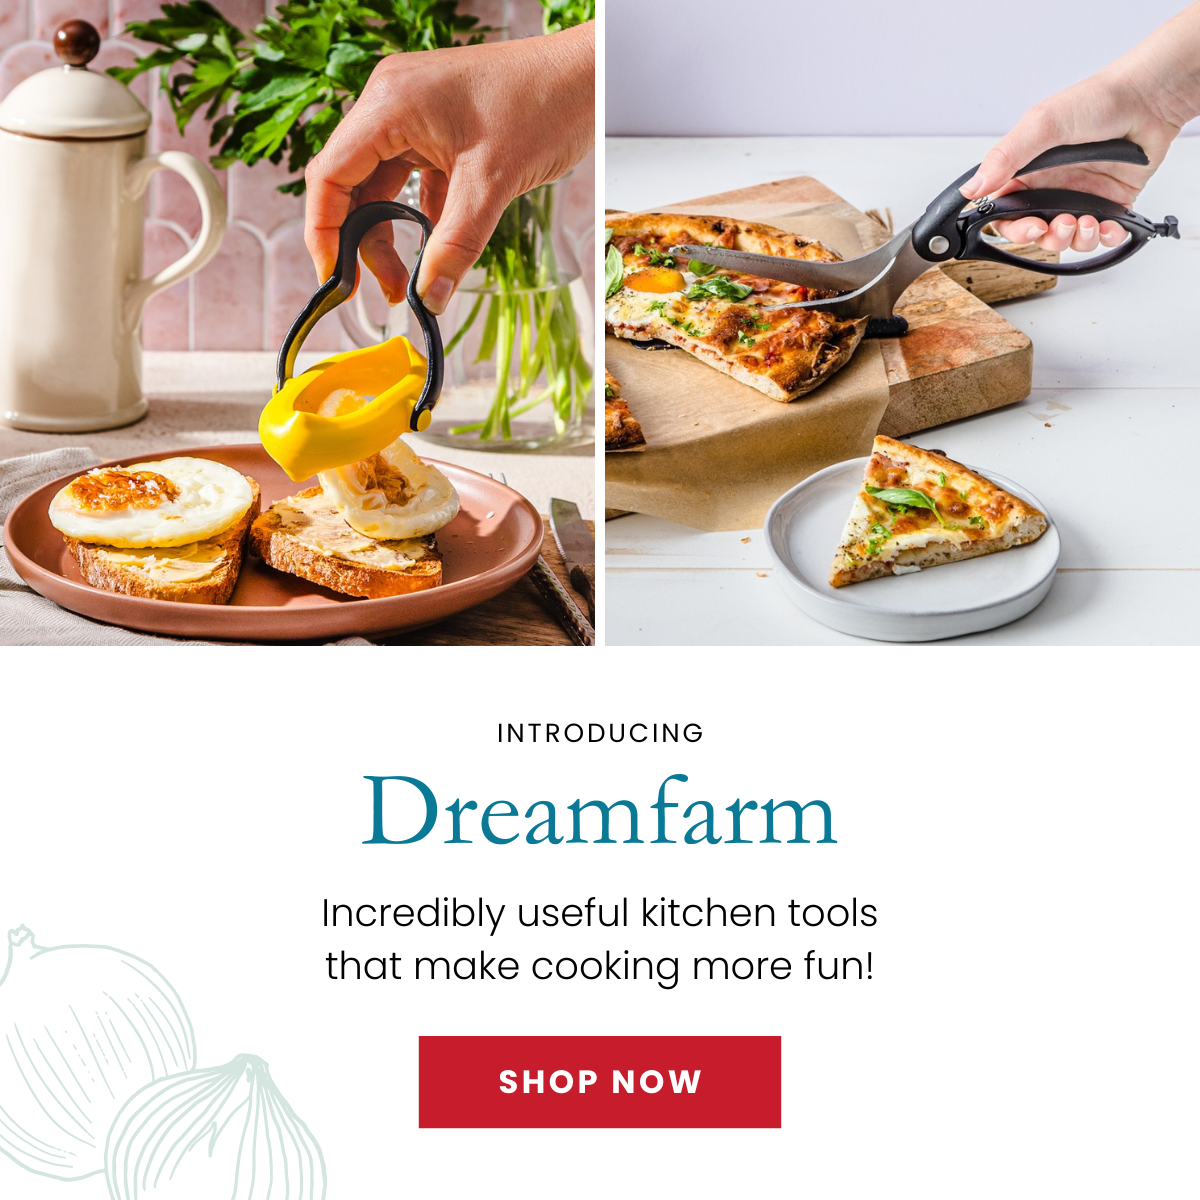 Introducing Dreamfam, Incredibly useful kitchen tools that make cooking more fun!